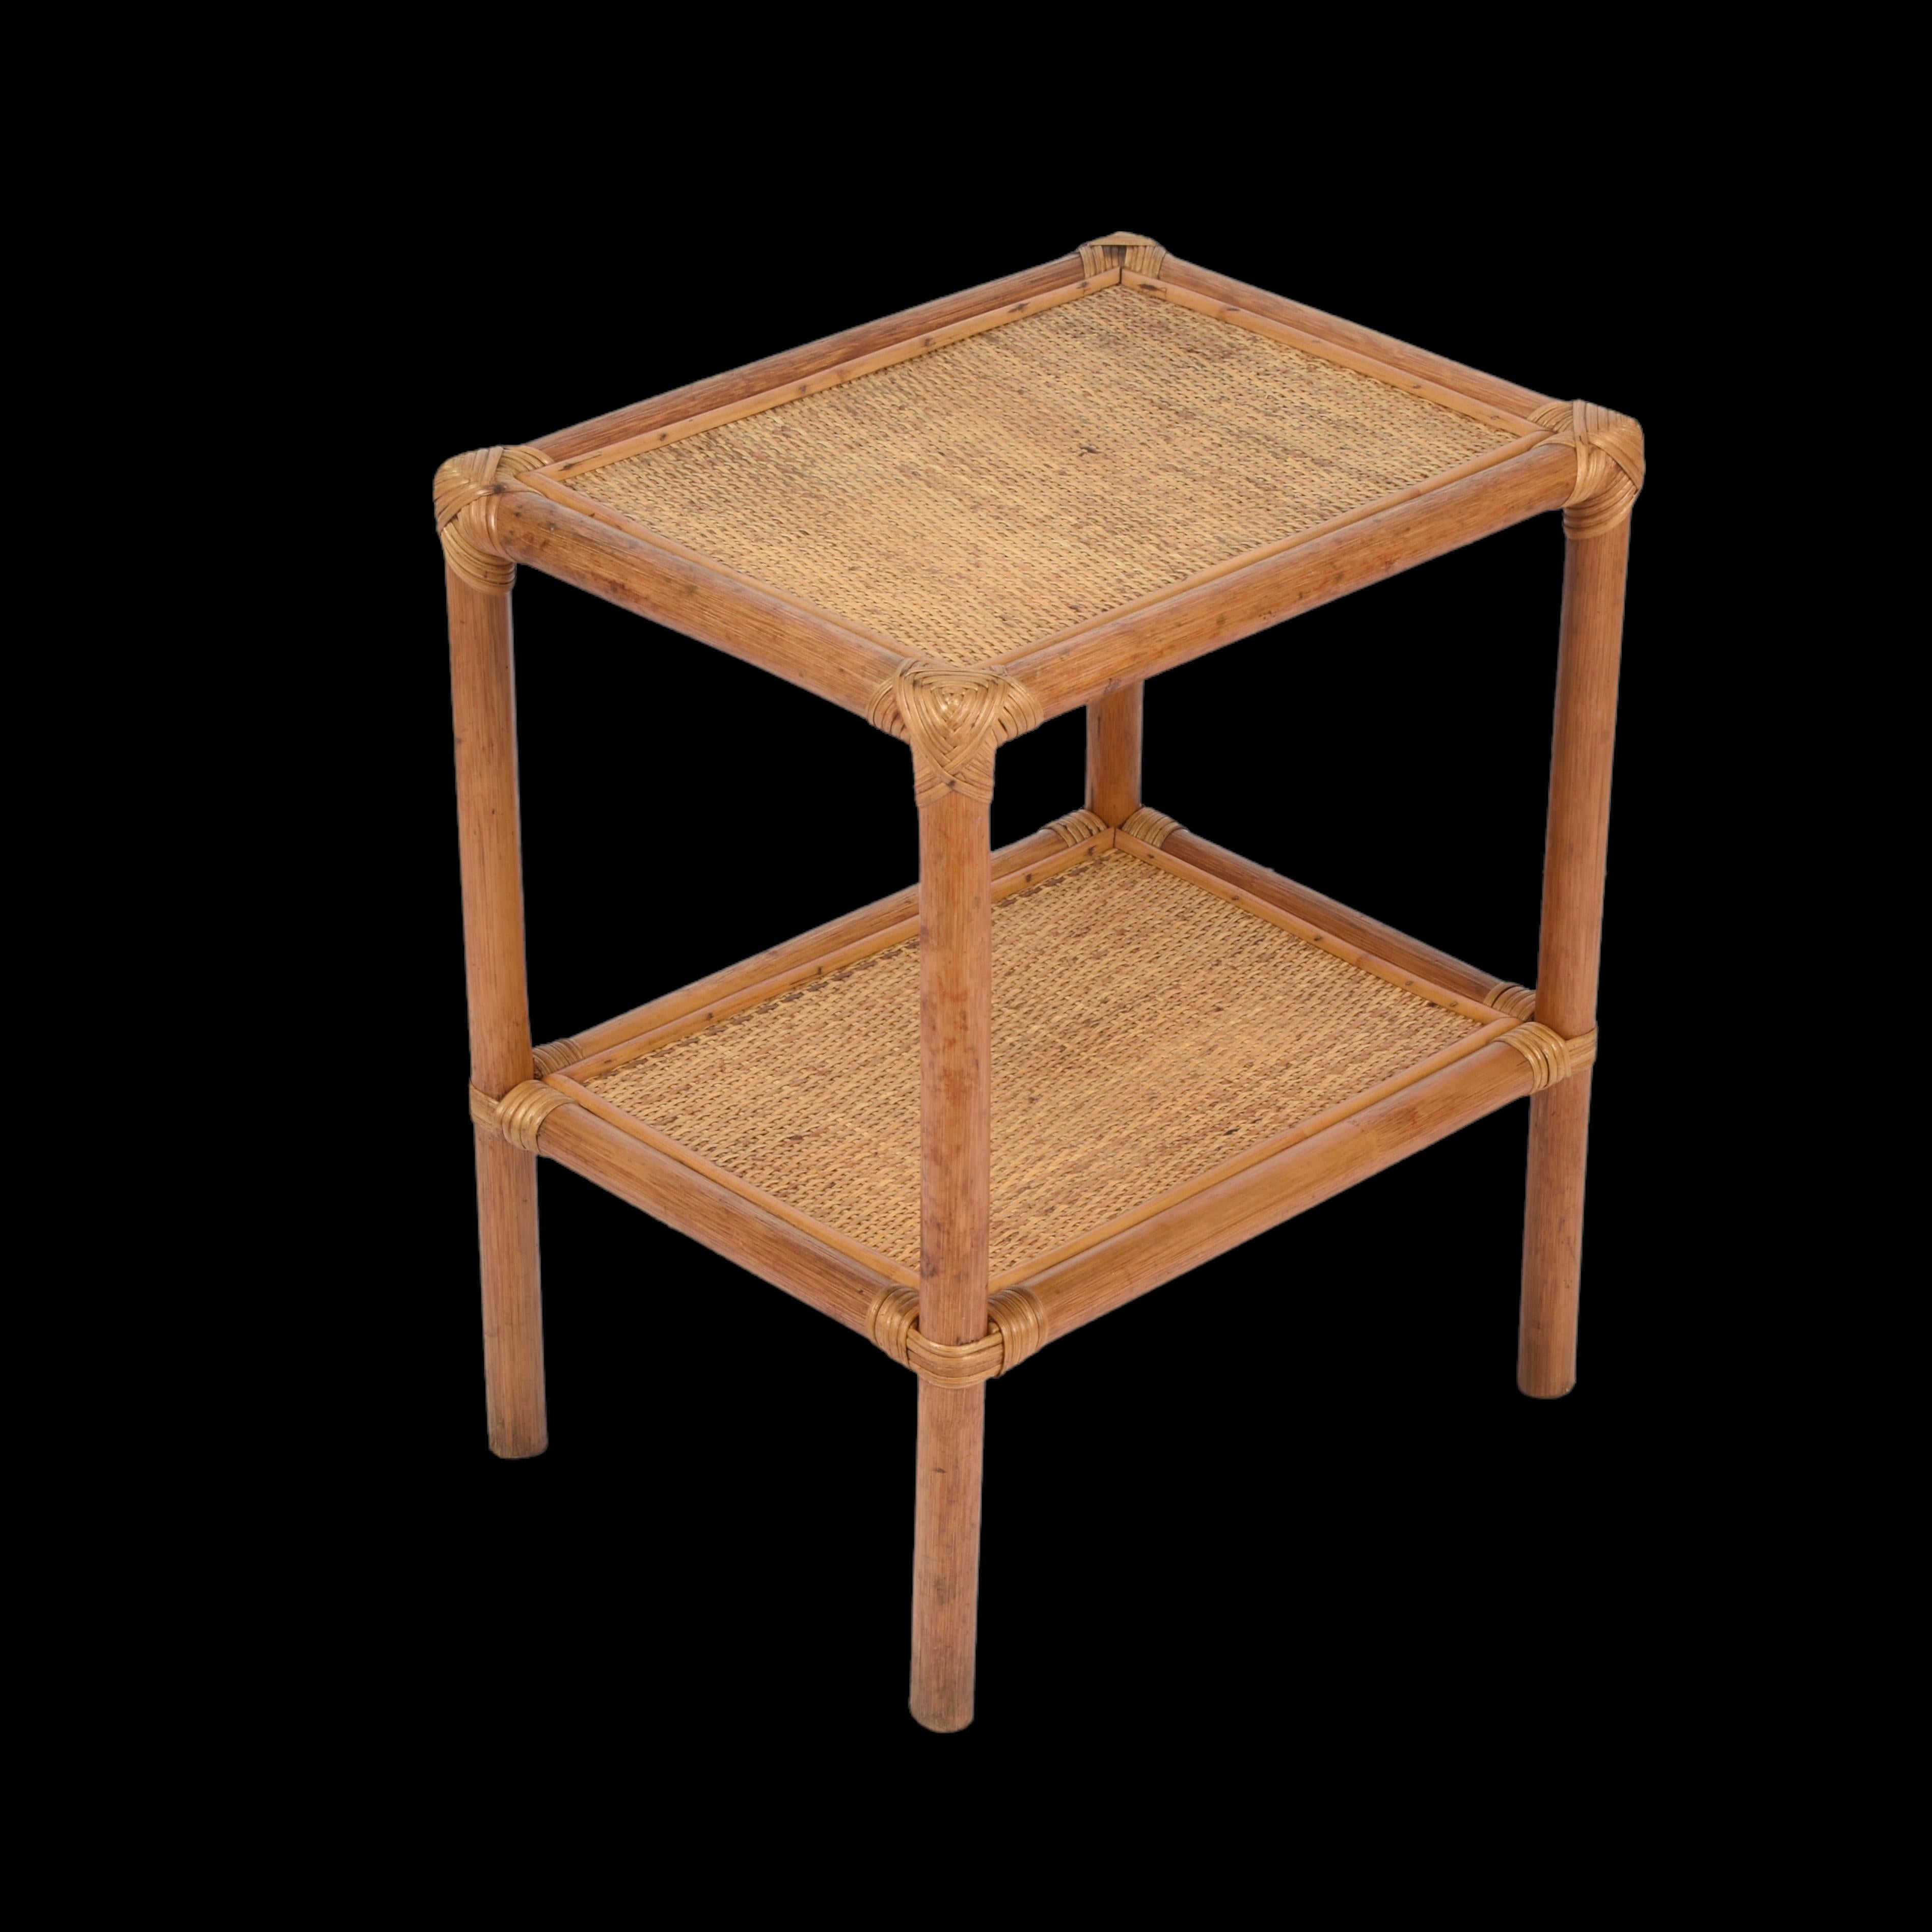 20th Century Mid-Century Rectangular Two-Tiers Bamboo and Rattan Italian Side Table, 1970s For Sale